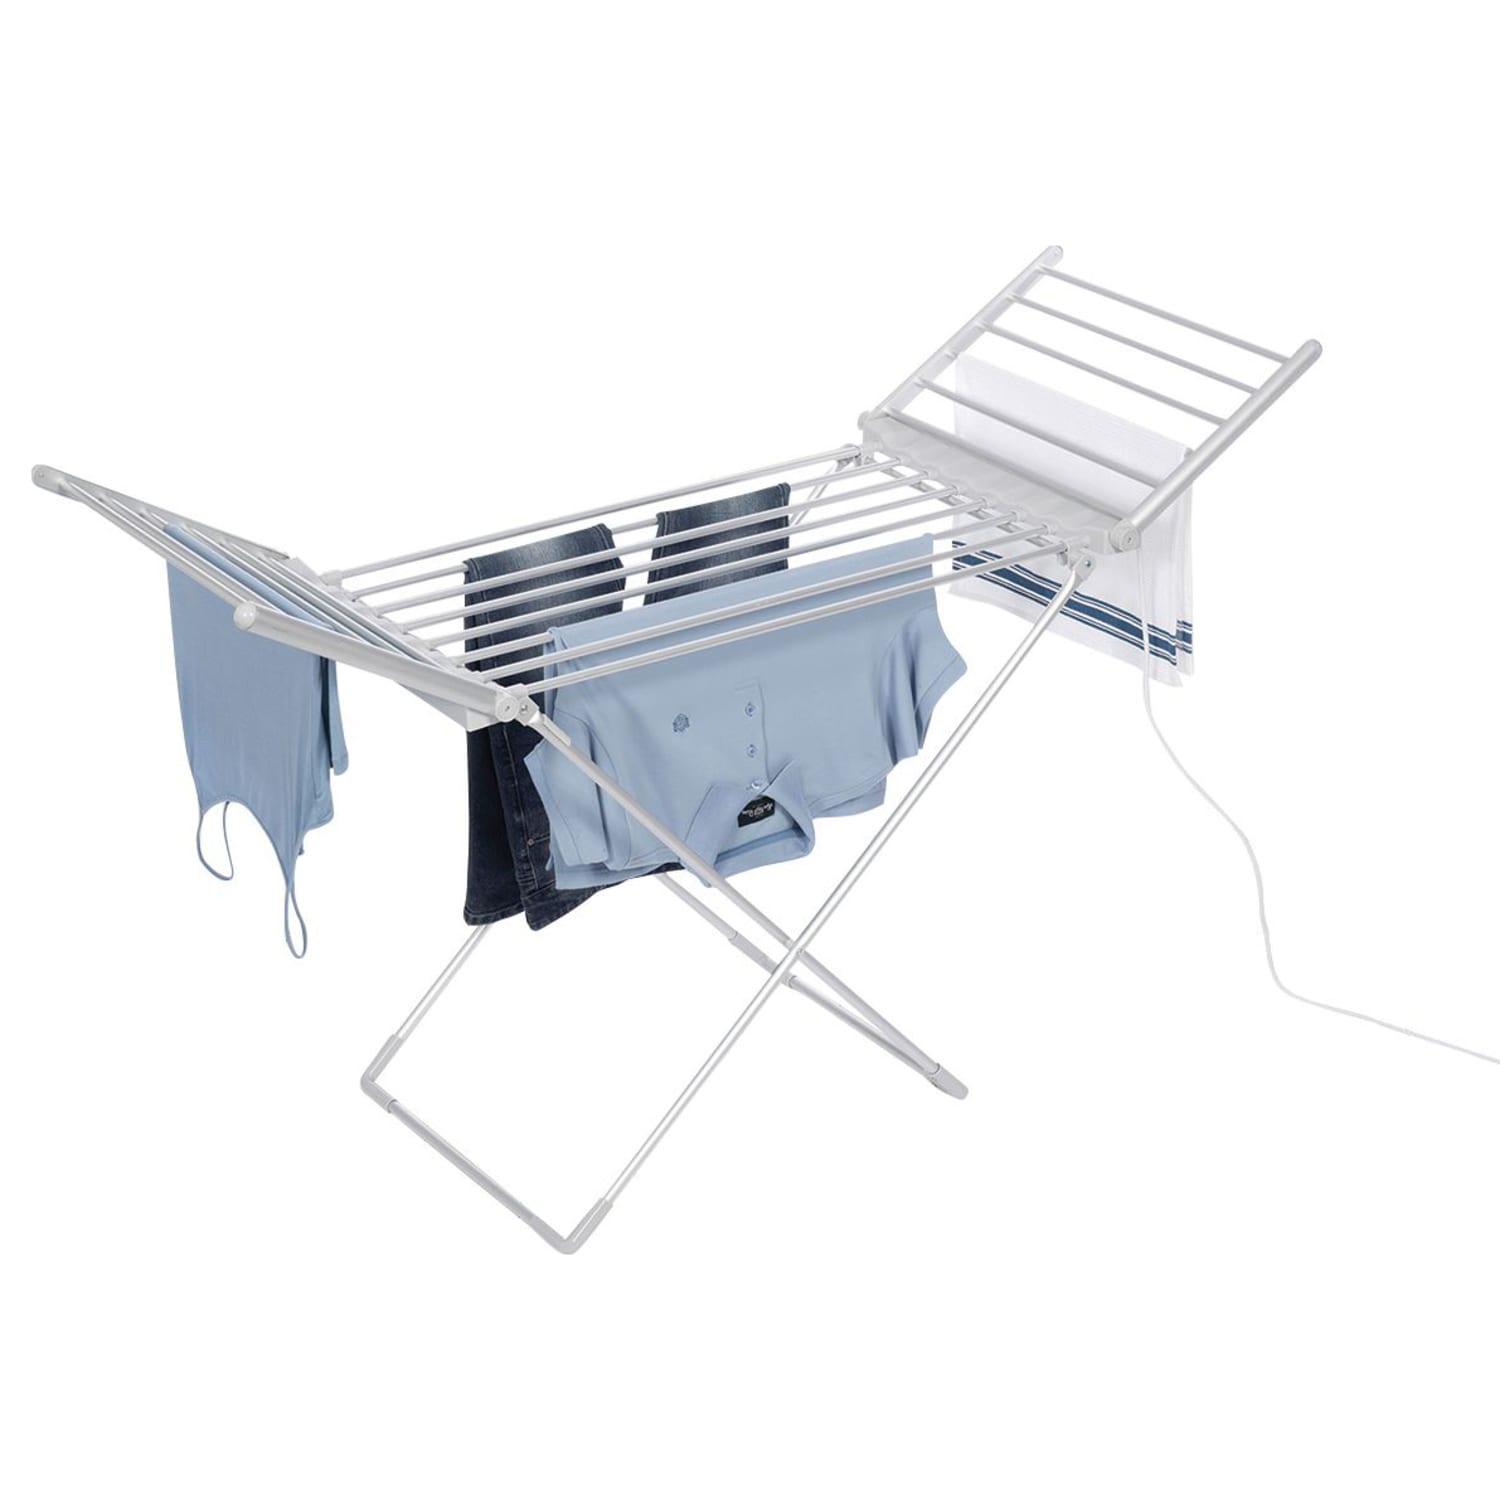  Heated Airer